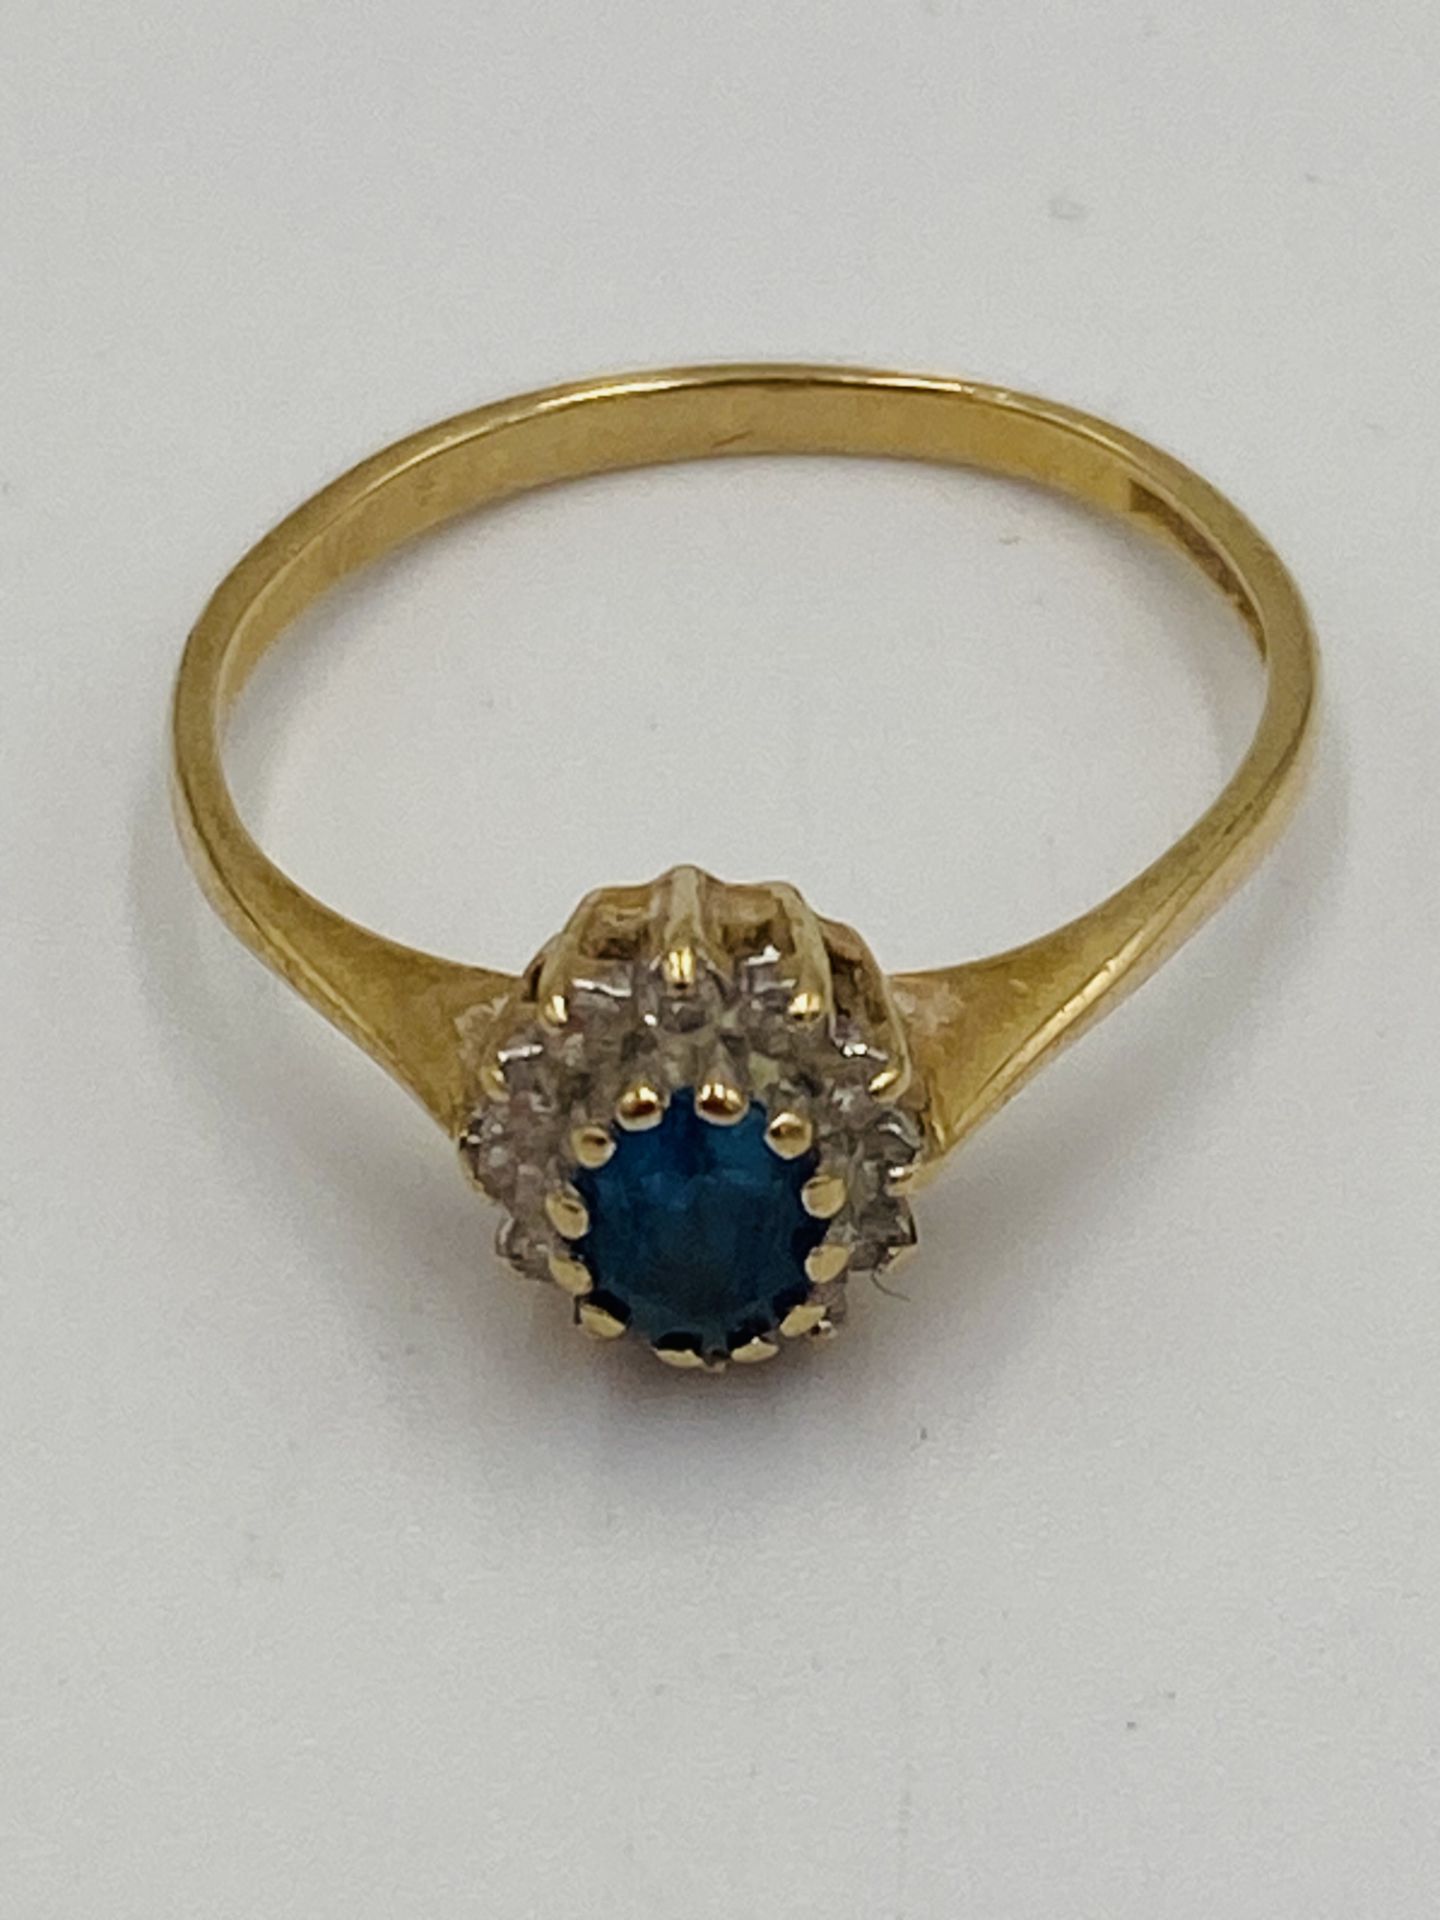 9ct gold ring set with a blue stone